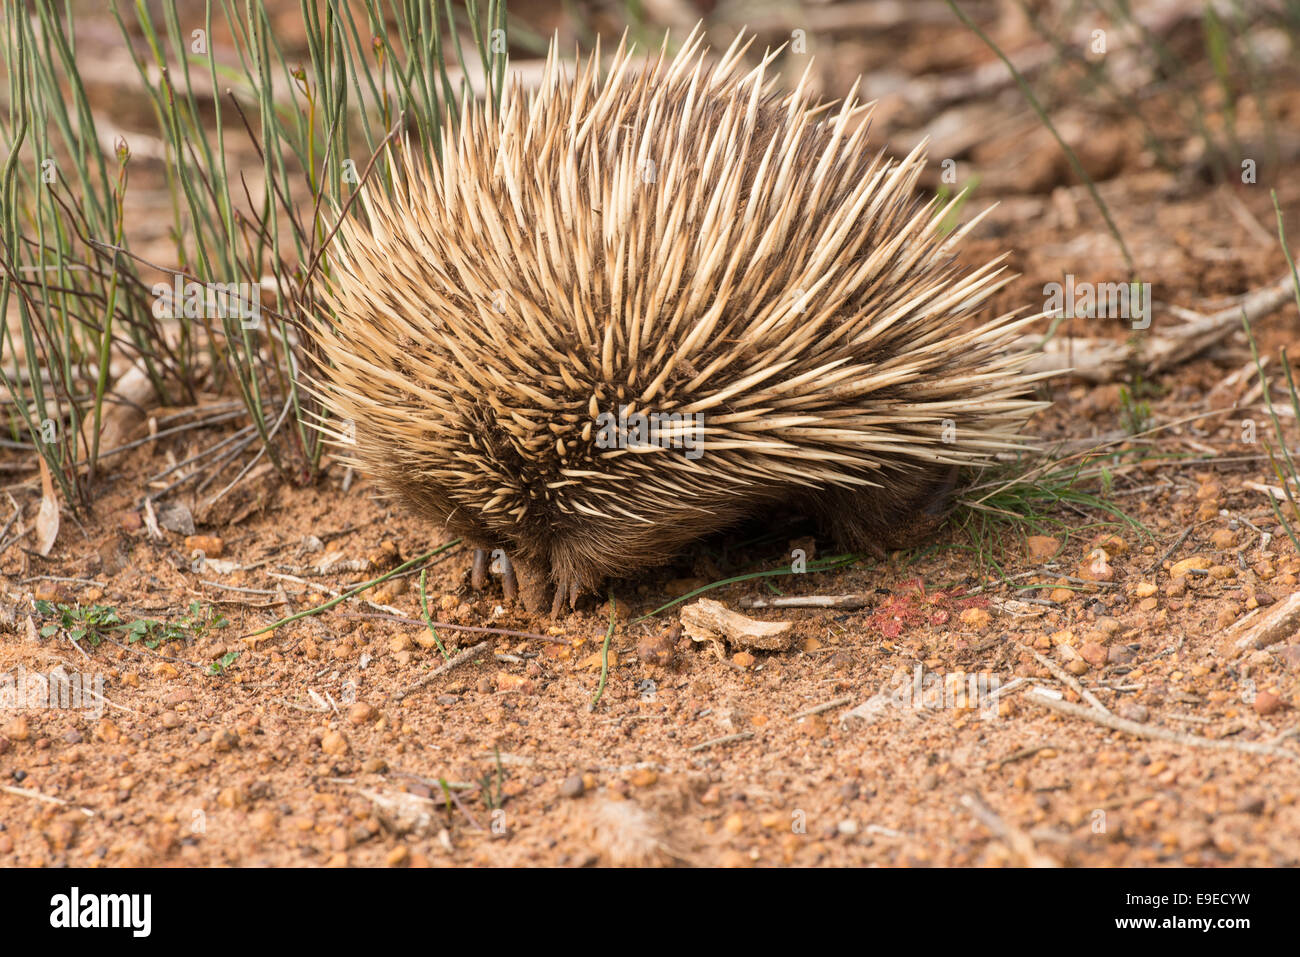 Stock photo of an echidna digging, looking for ants. Stock Photo